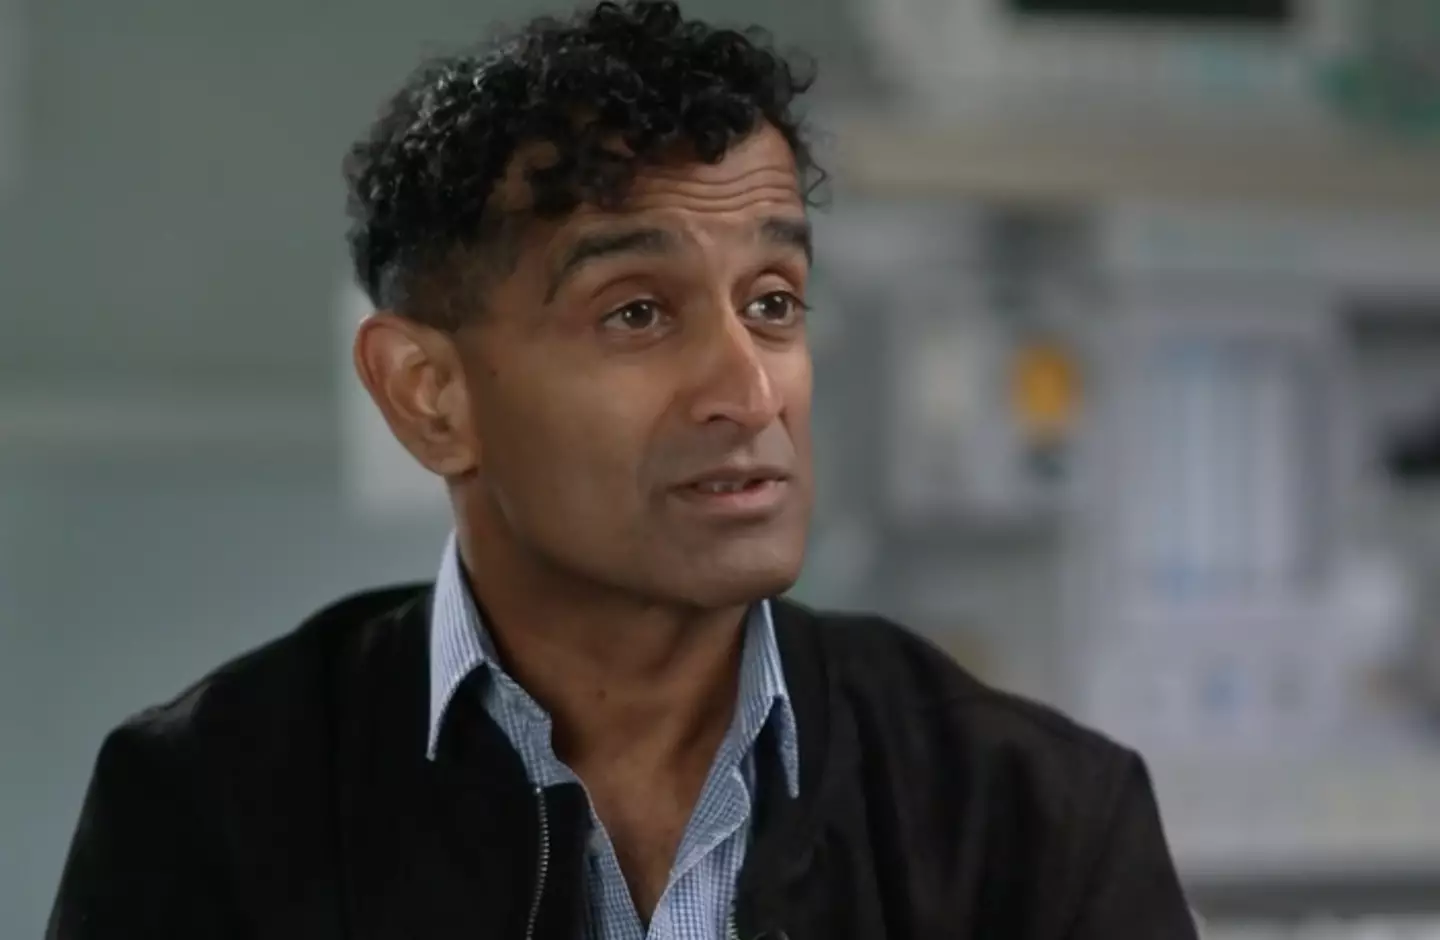 Doctor Ravi Jayaram 'genuinely believes' the babies' lives could have been saved.